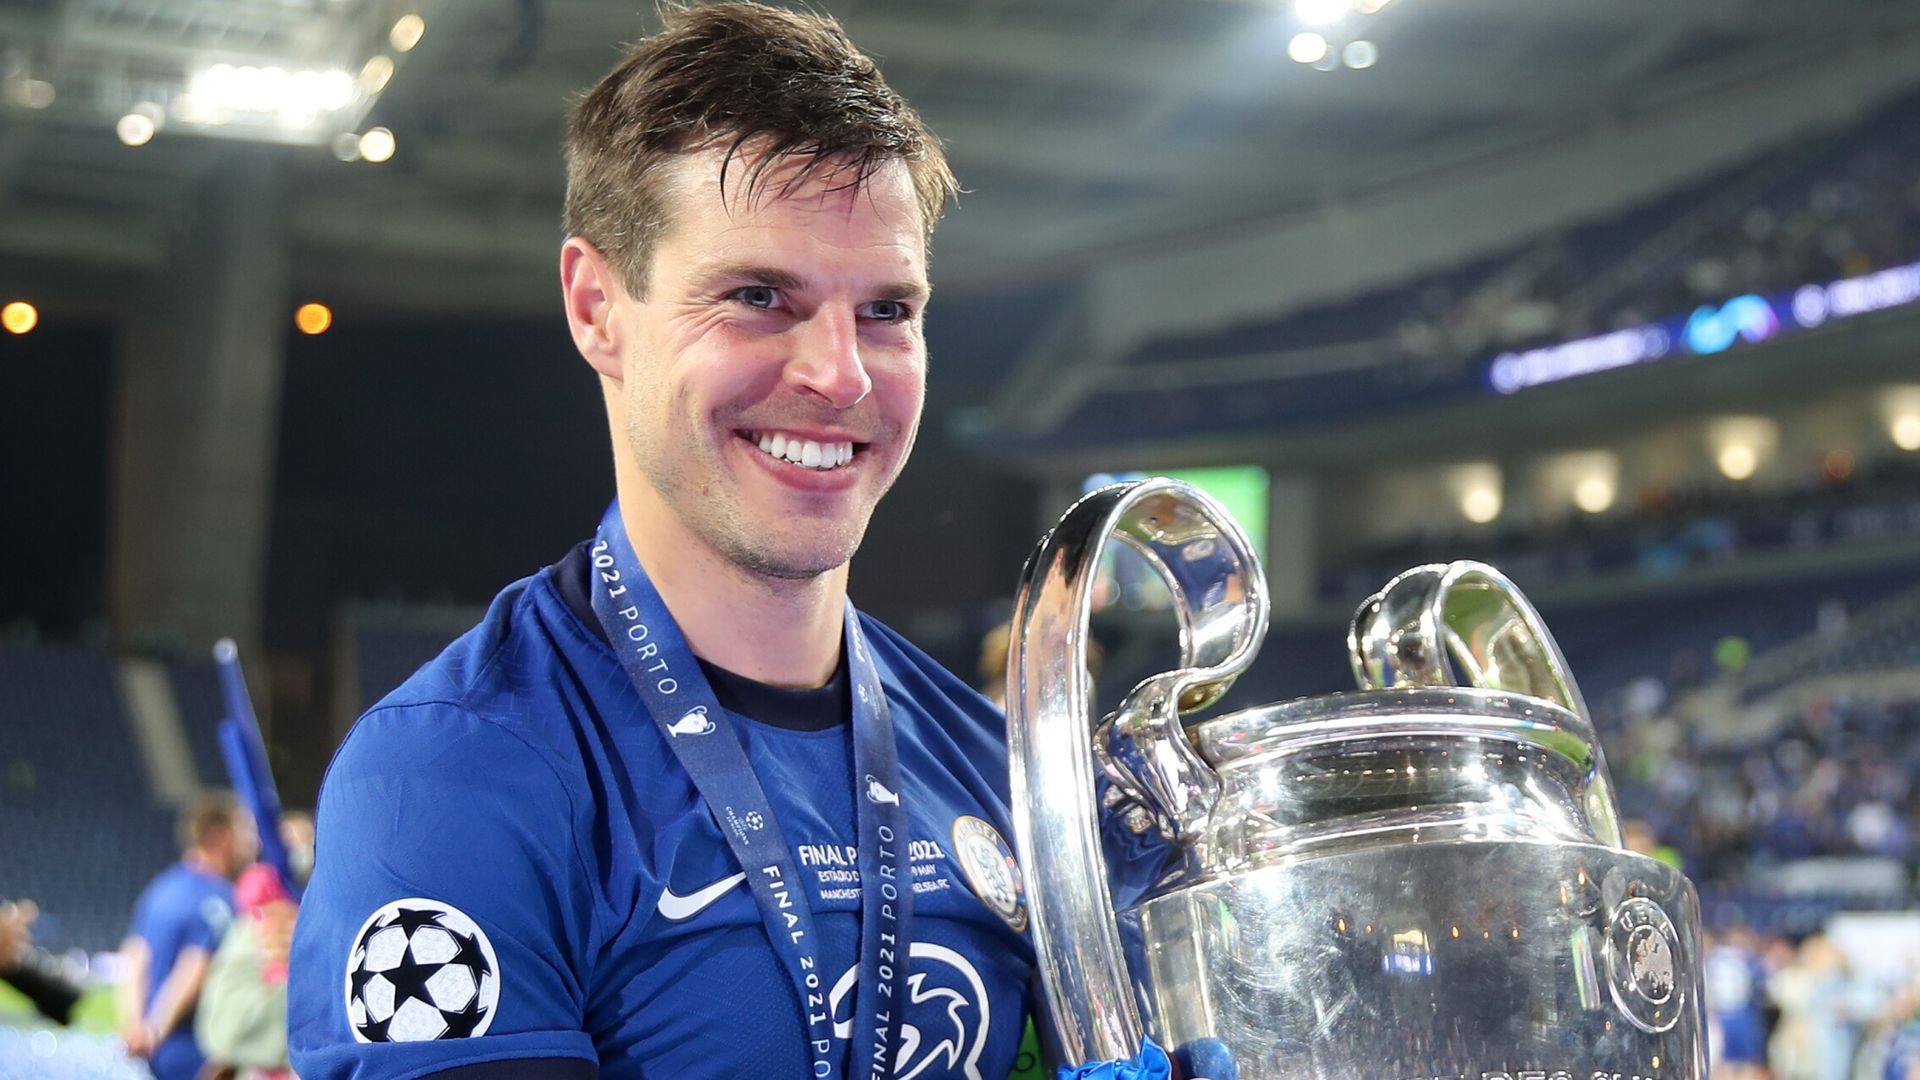 'This is my home' - Azpilicueta signs new two-year Chelsea deal